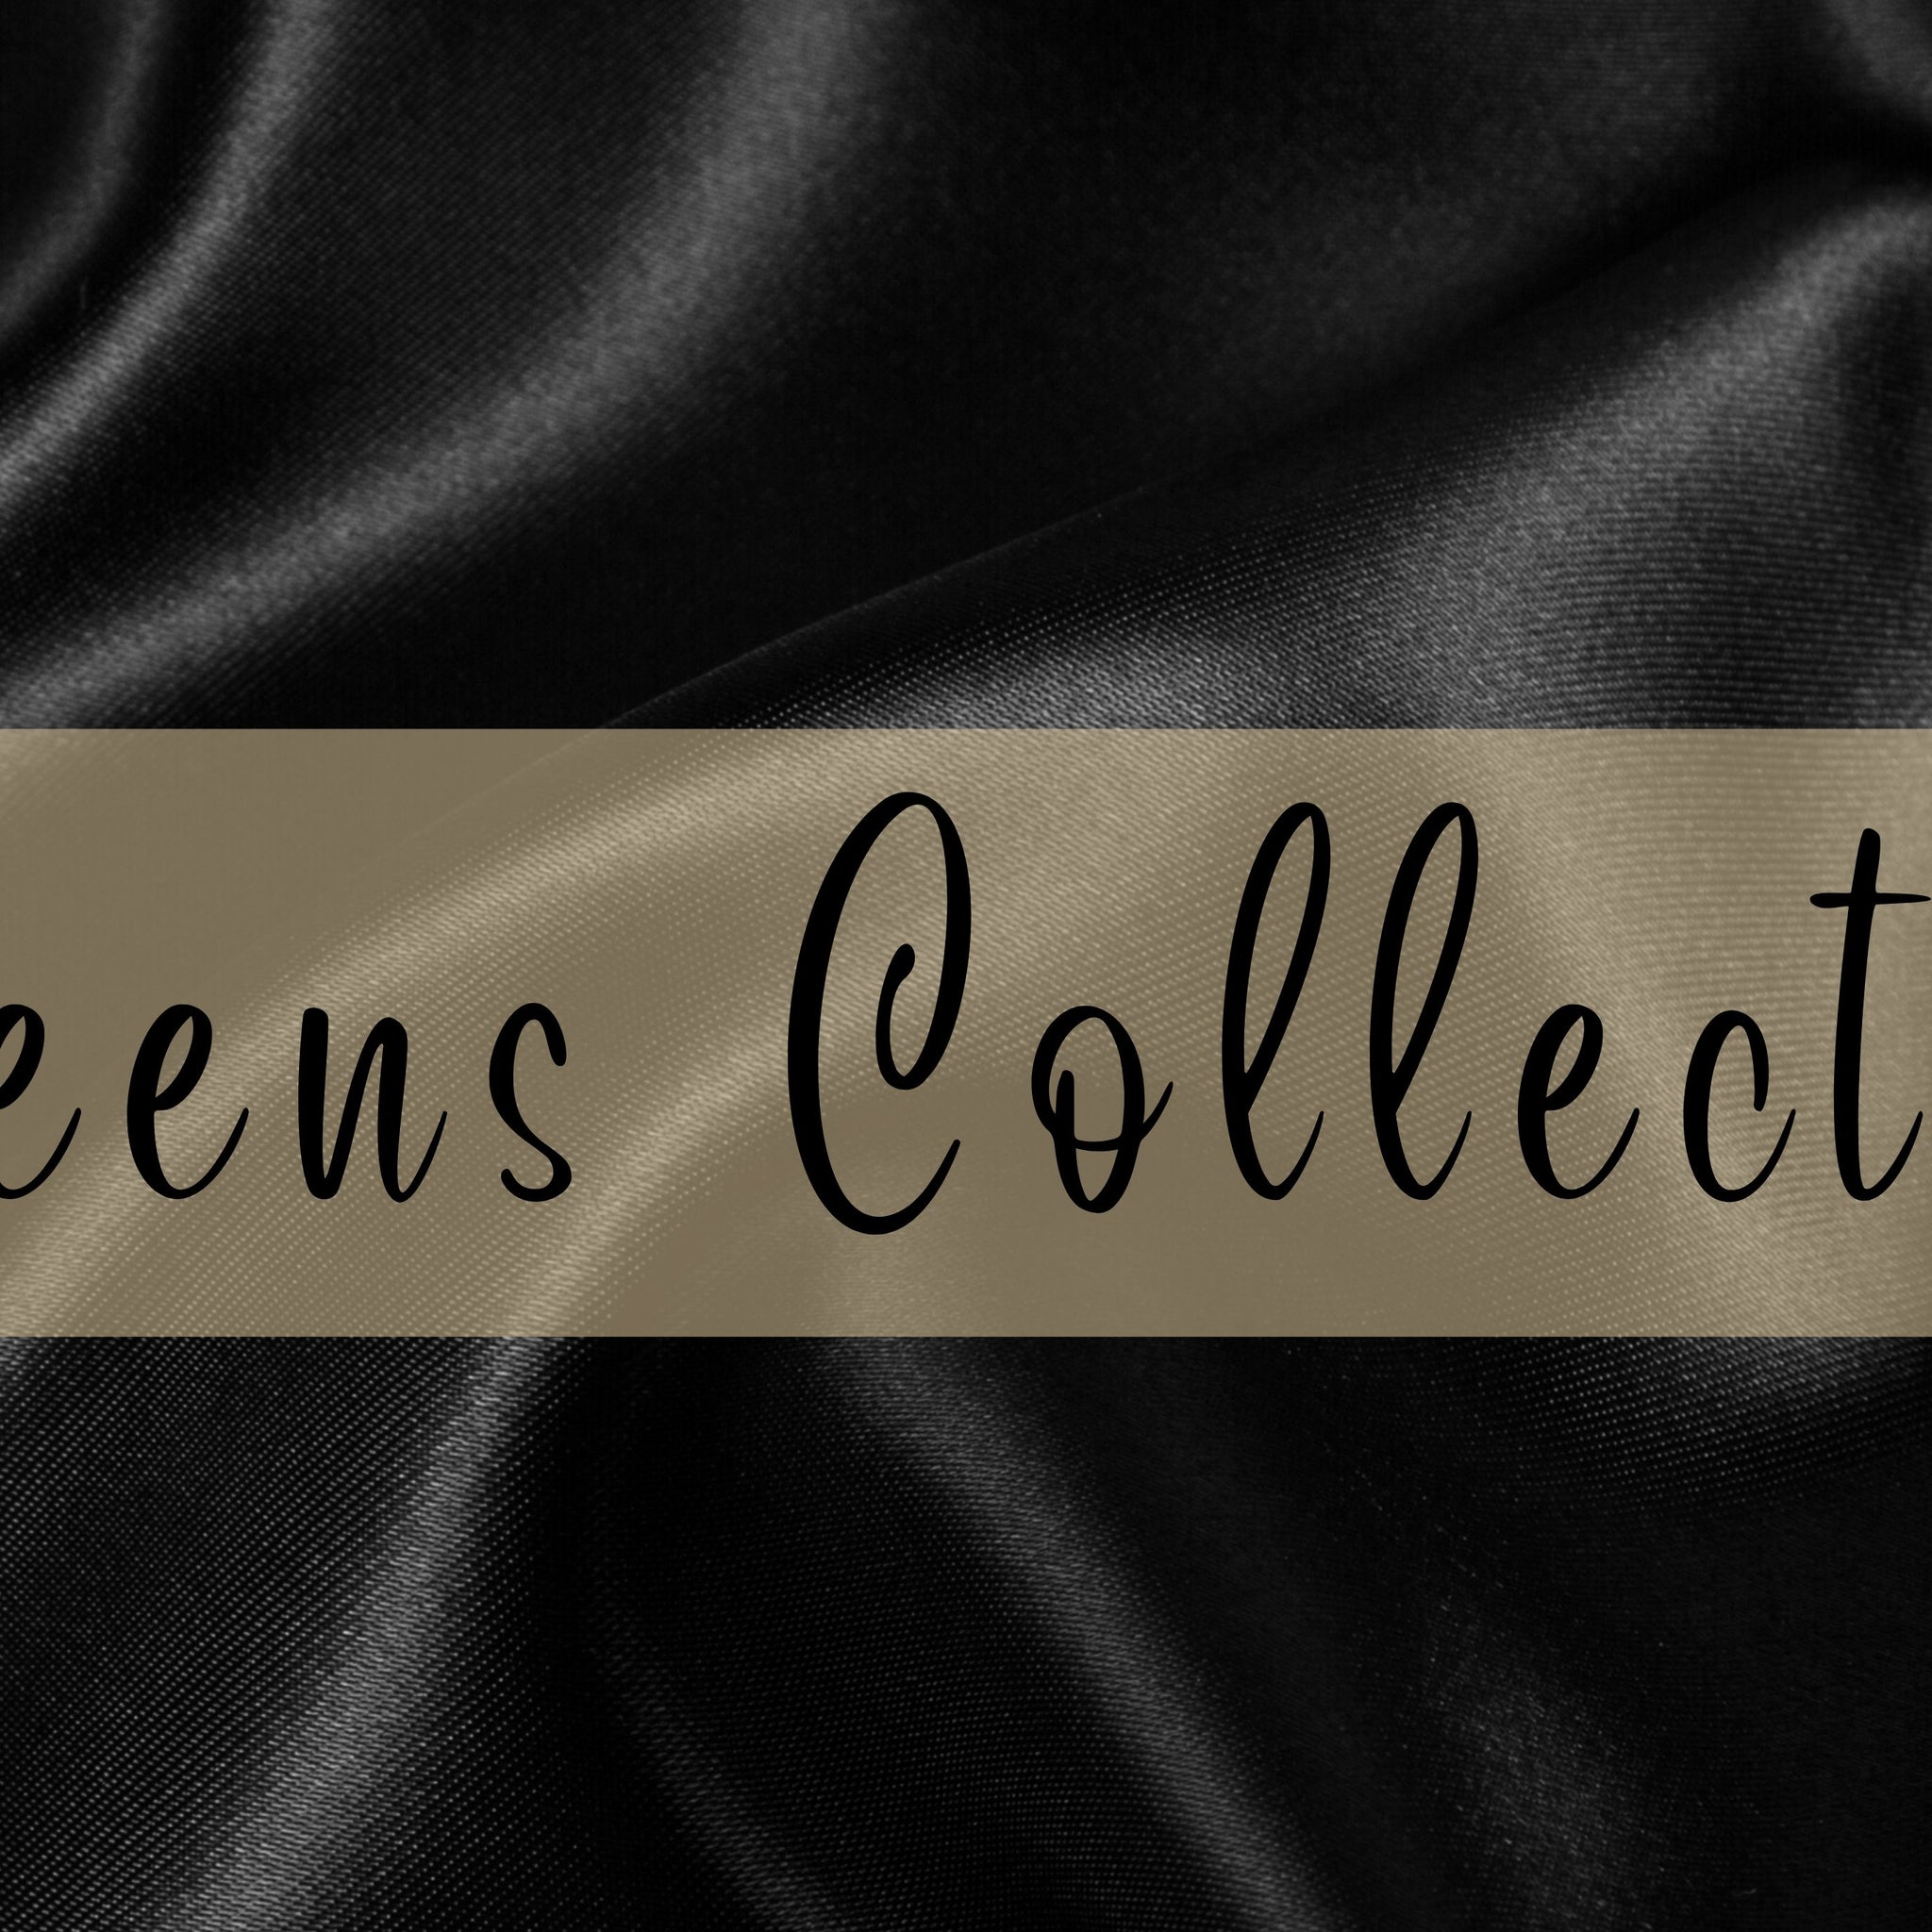 Queens Collection